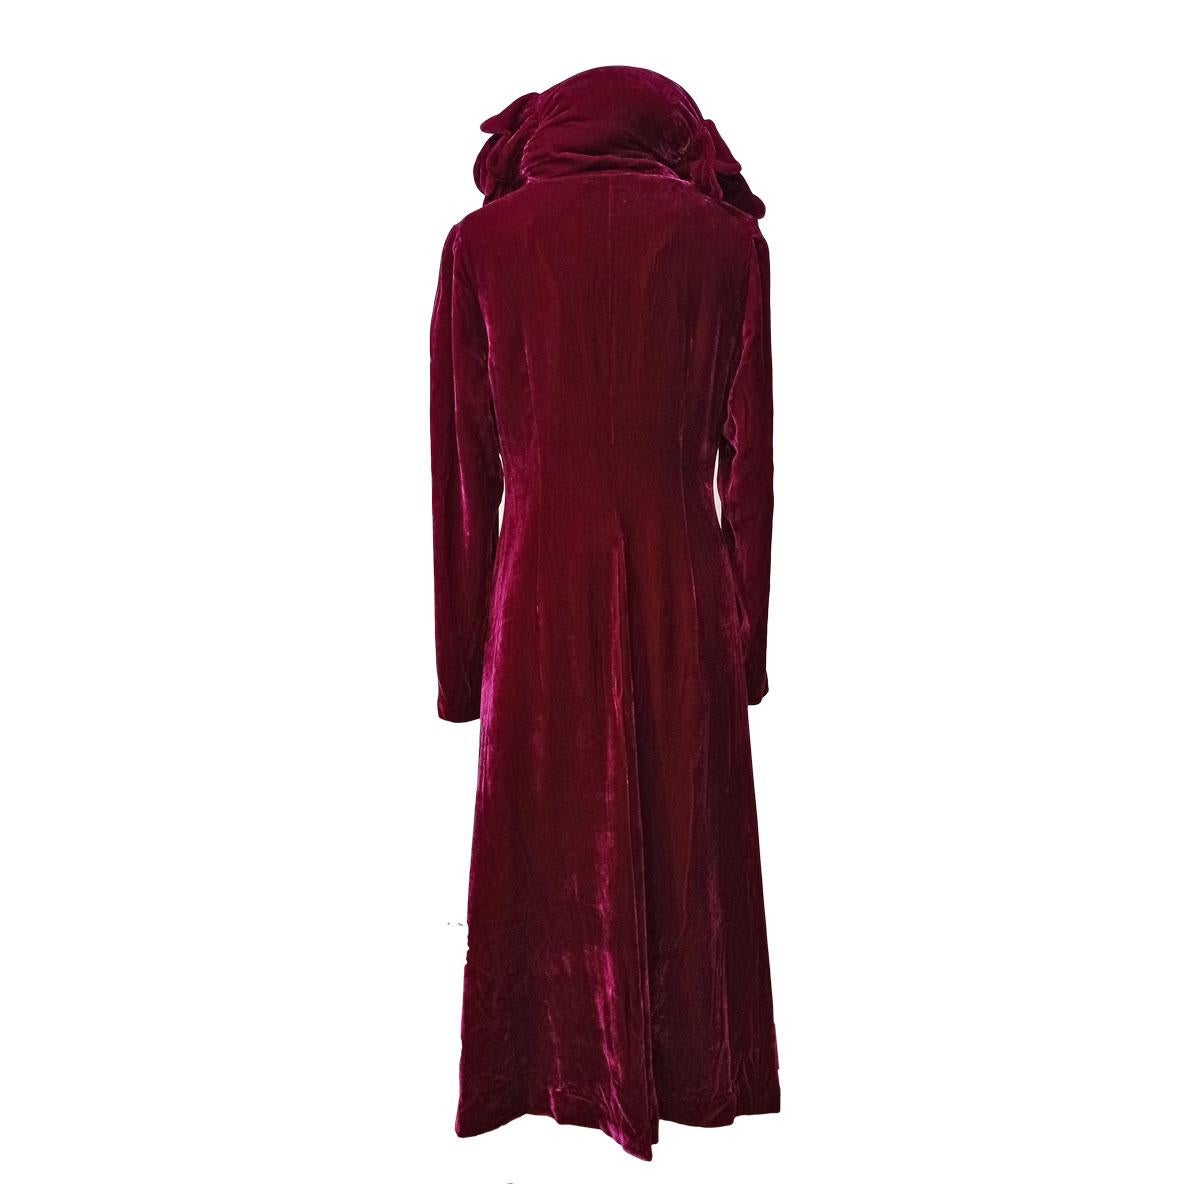 Theatrical overcoat by Patty Shelabarger
Rayon (82%) Silk (18%)
Cyclamen color
Double breasted
Back slit
Pleat neck
Total length from shoulder cm 119 (46,85 inches)
Shoulder cm 37 (14,56 inches)
Worldwide express shipping included in the price !